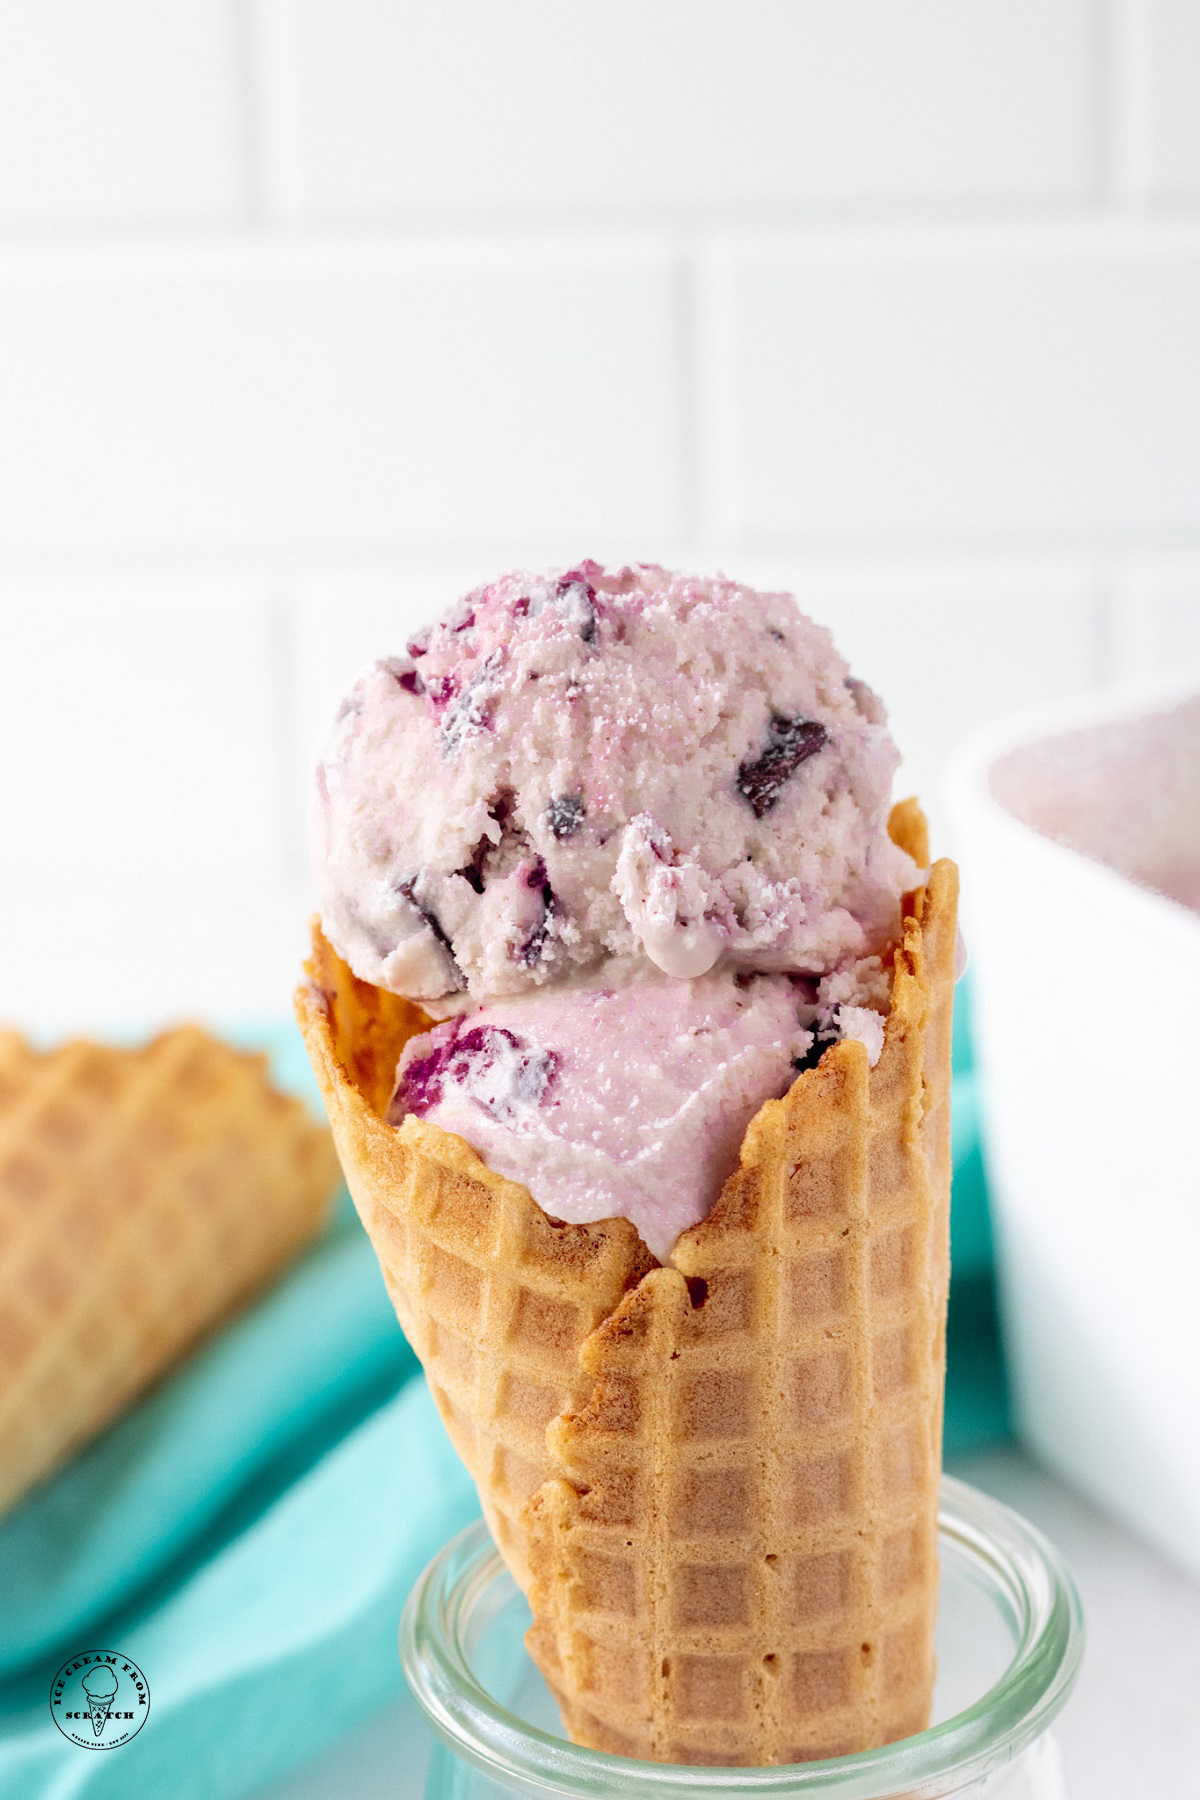 scoops of amaretto ice cream with cherries and chocolate in a waffle cone.